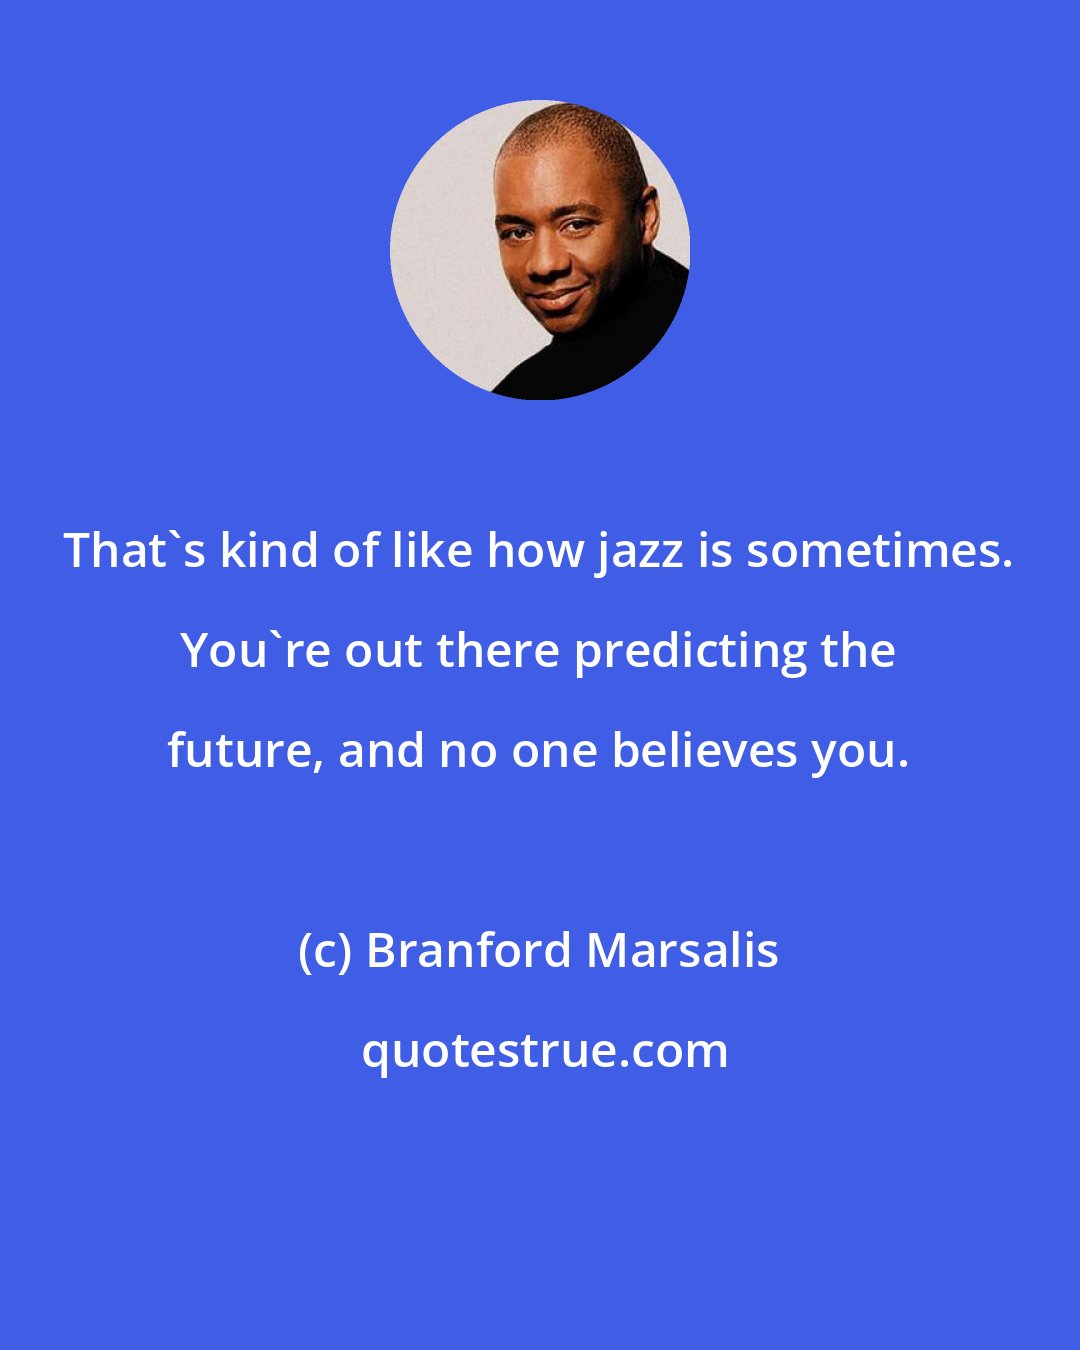 Branford Marsalis: That's kind of like how jazz is sometimes. You're out there predicting the future, and no one believes you.